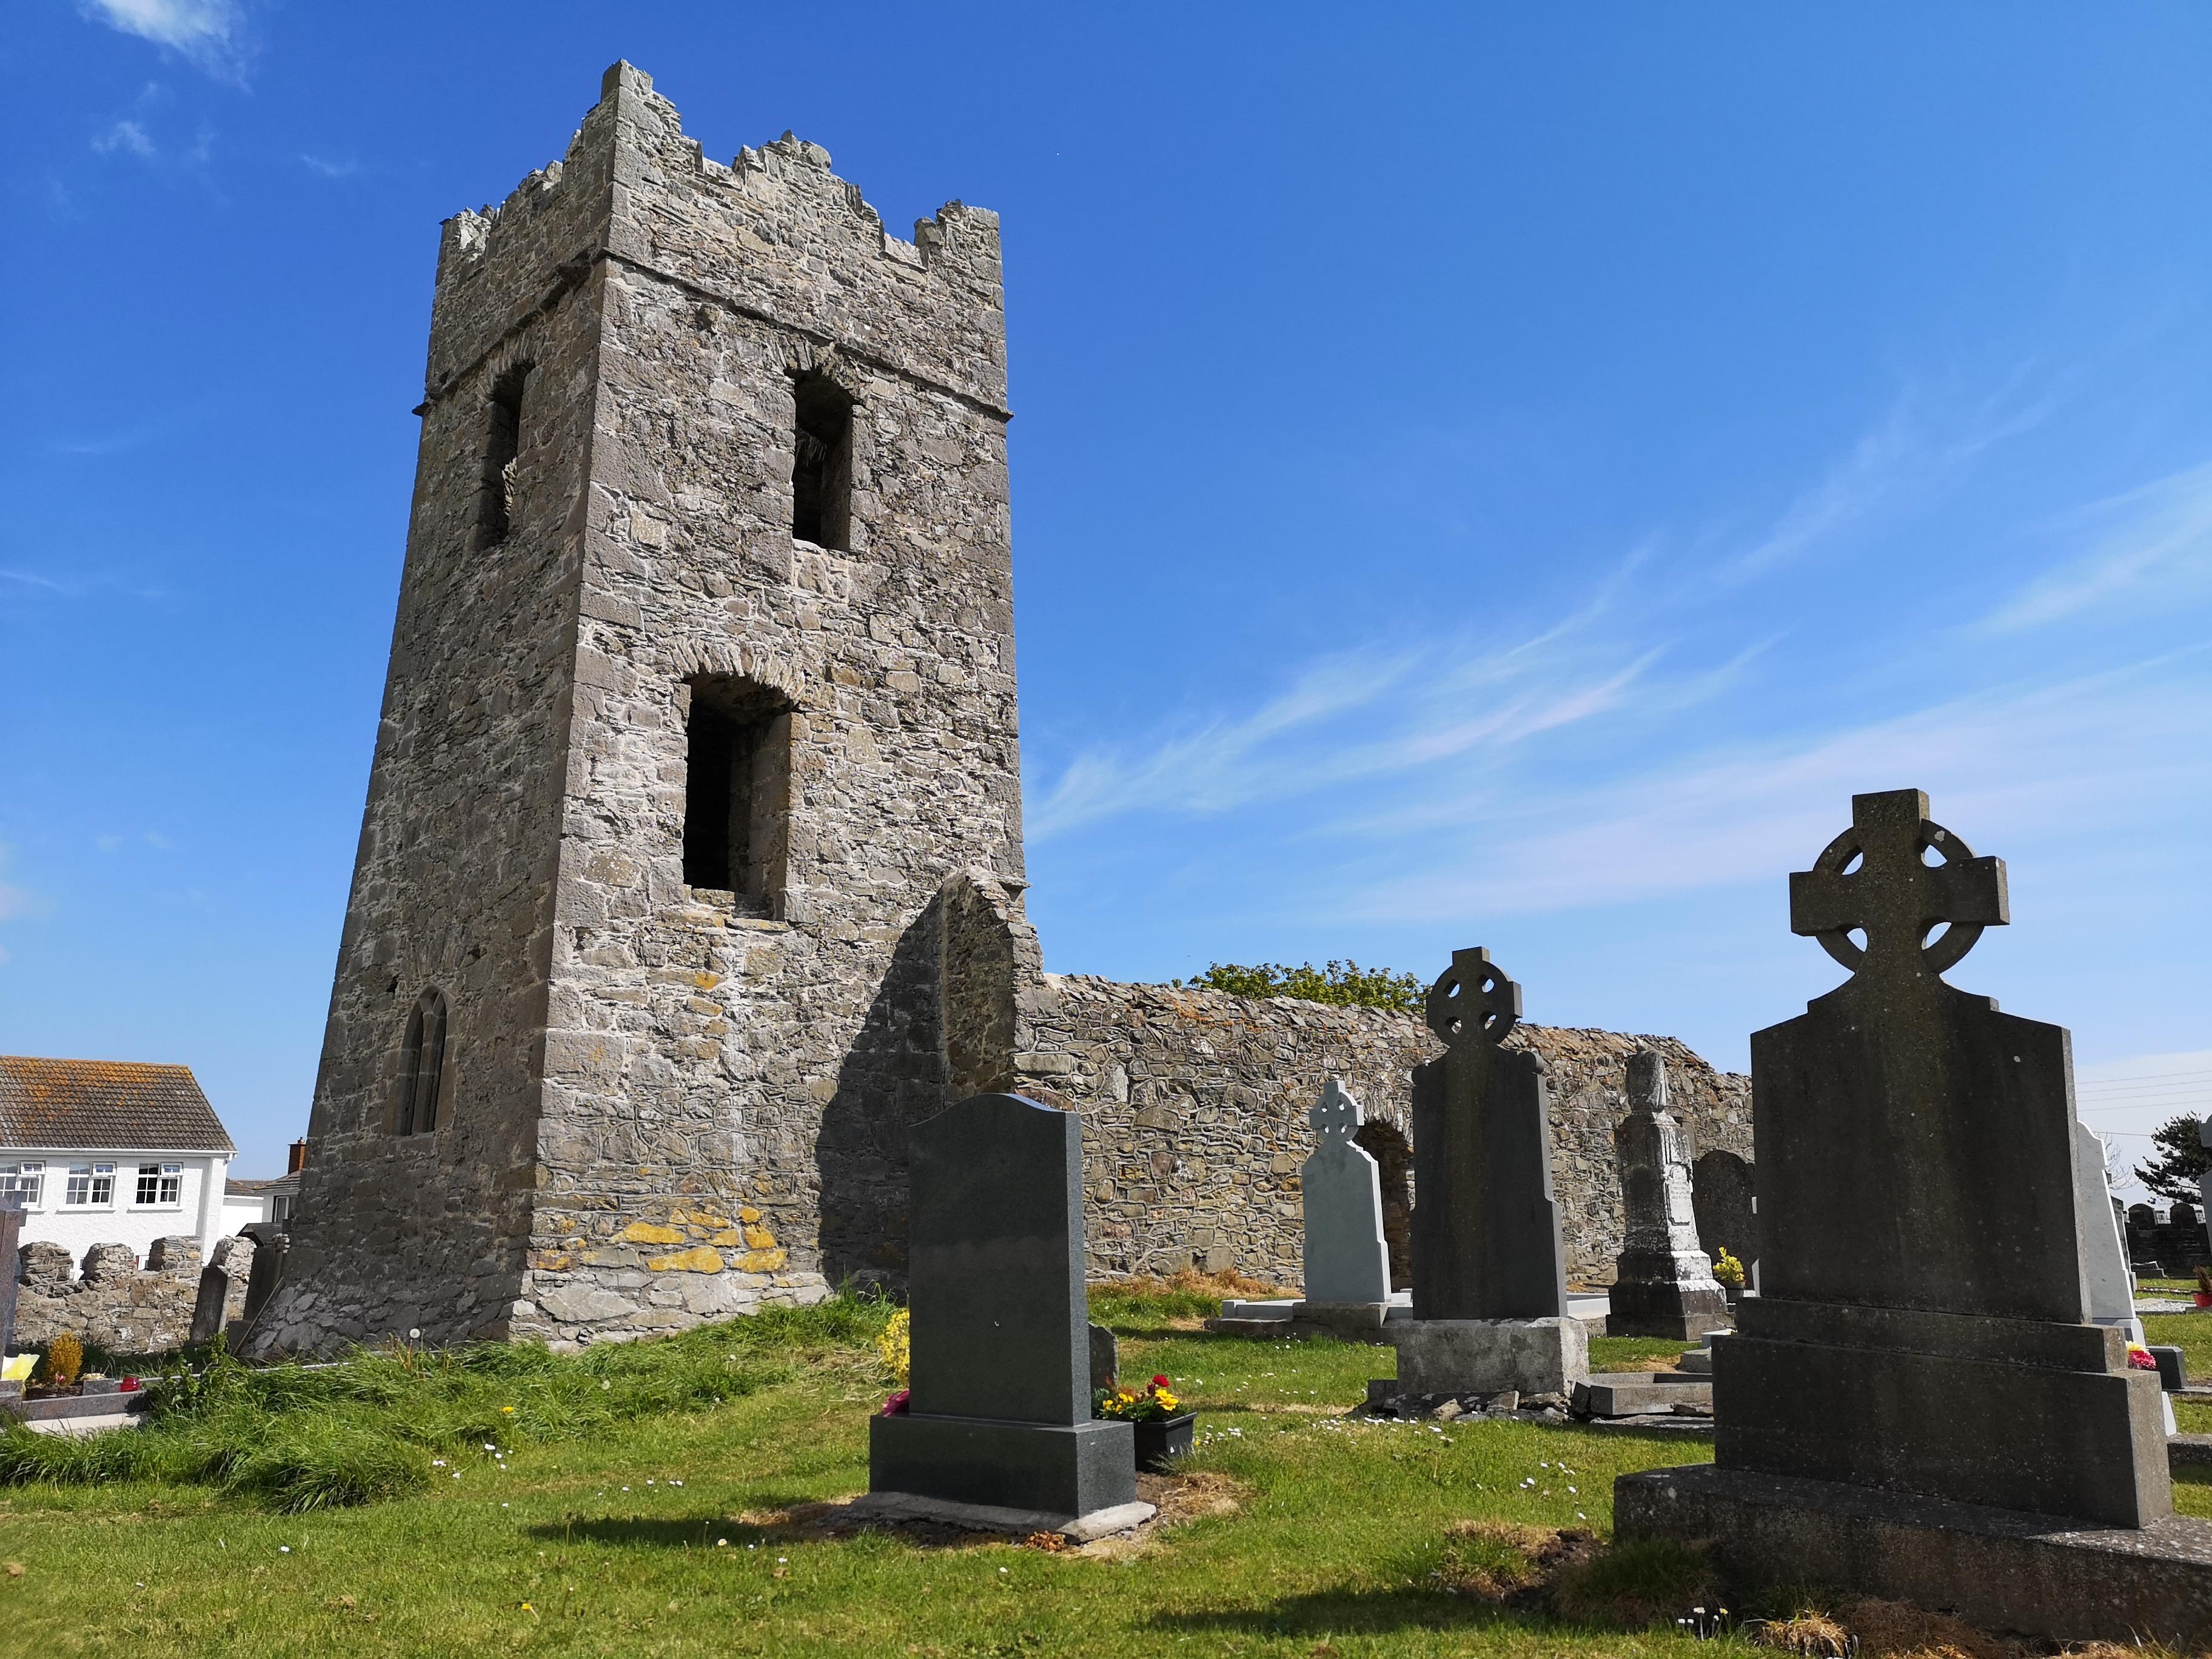 Ruin of church building with tower with graveyard